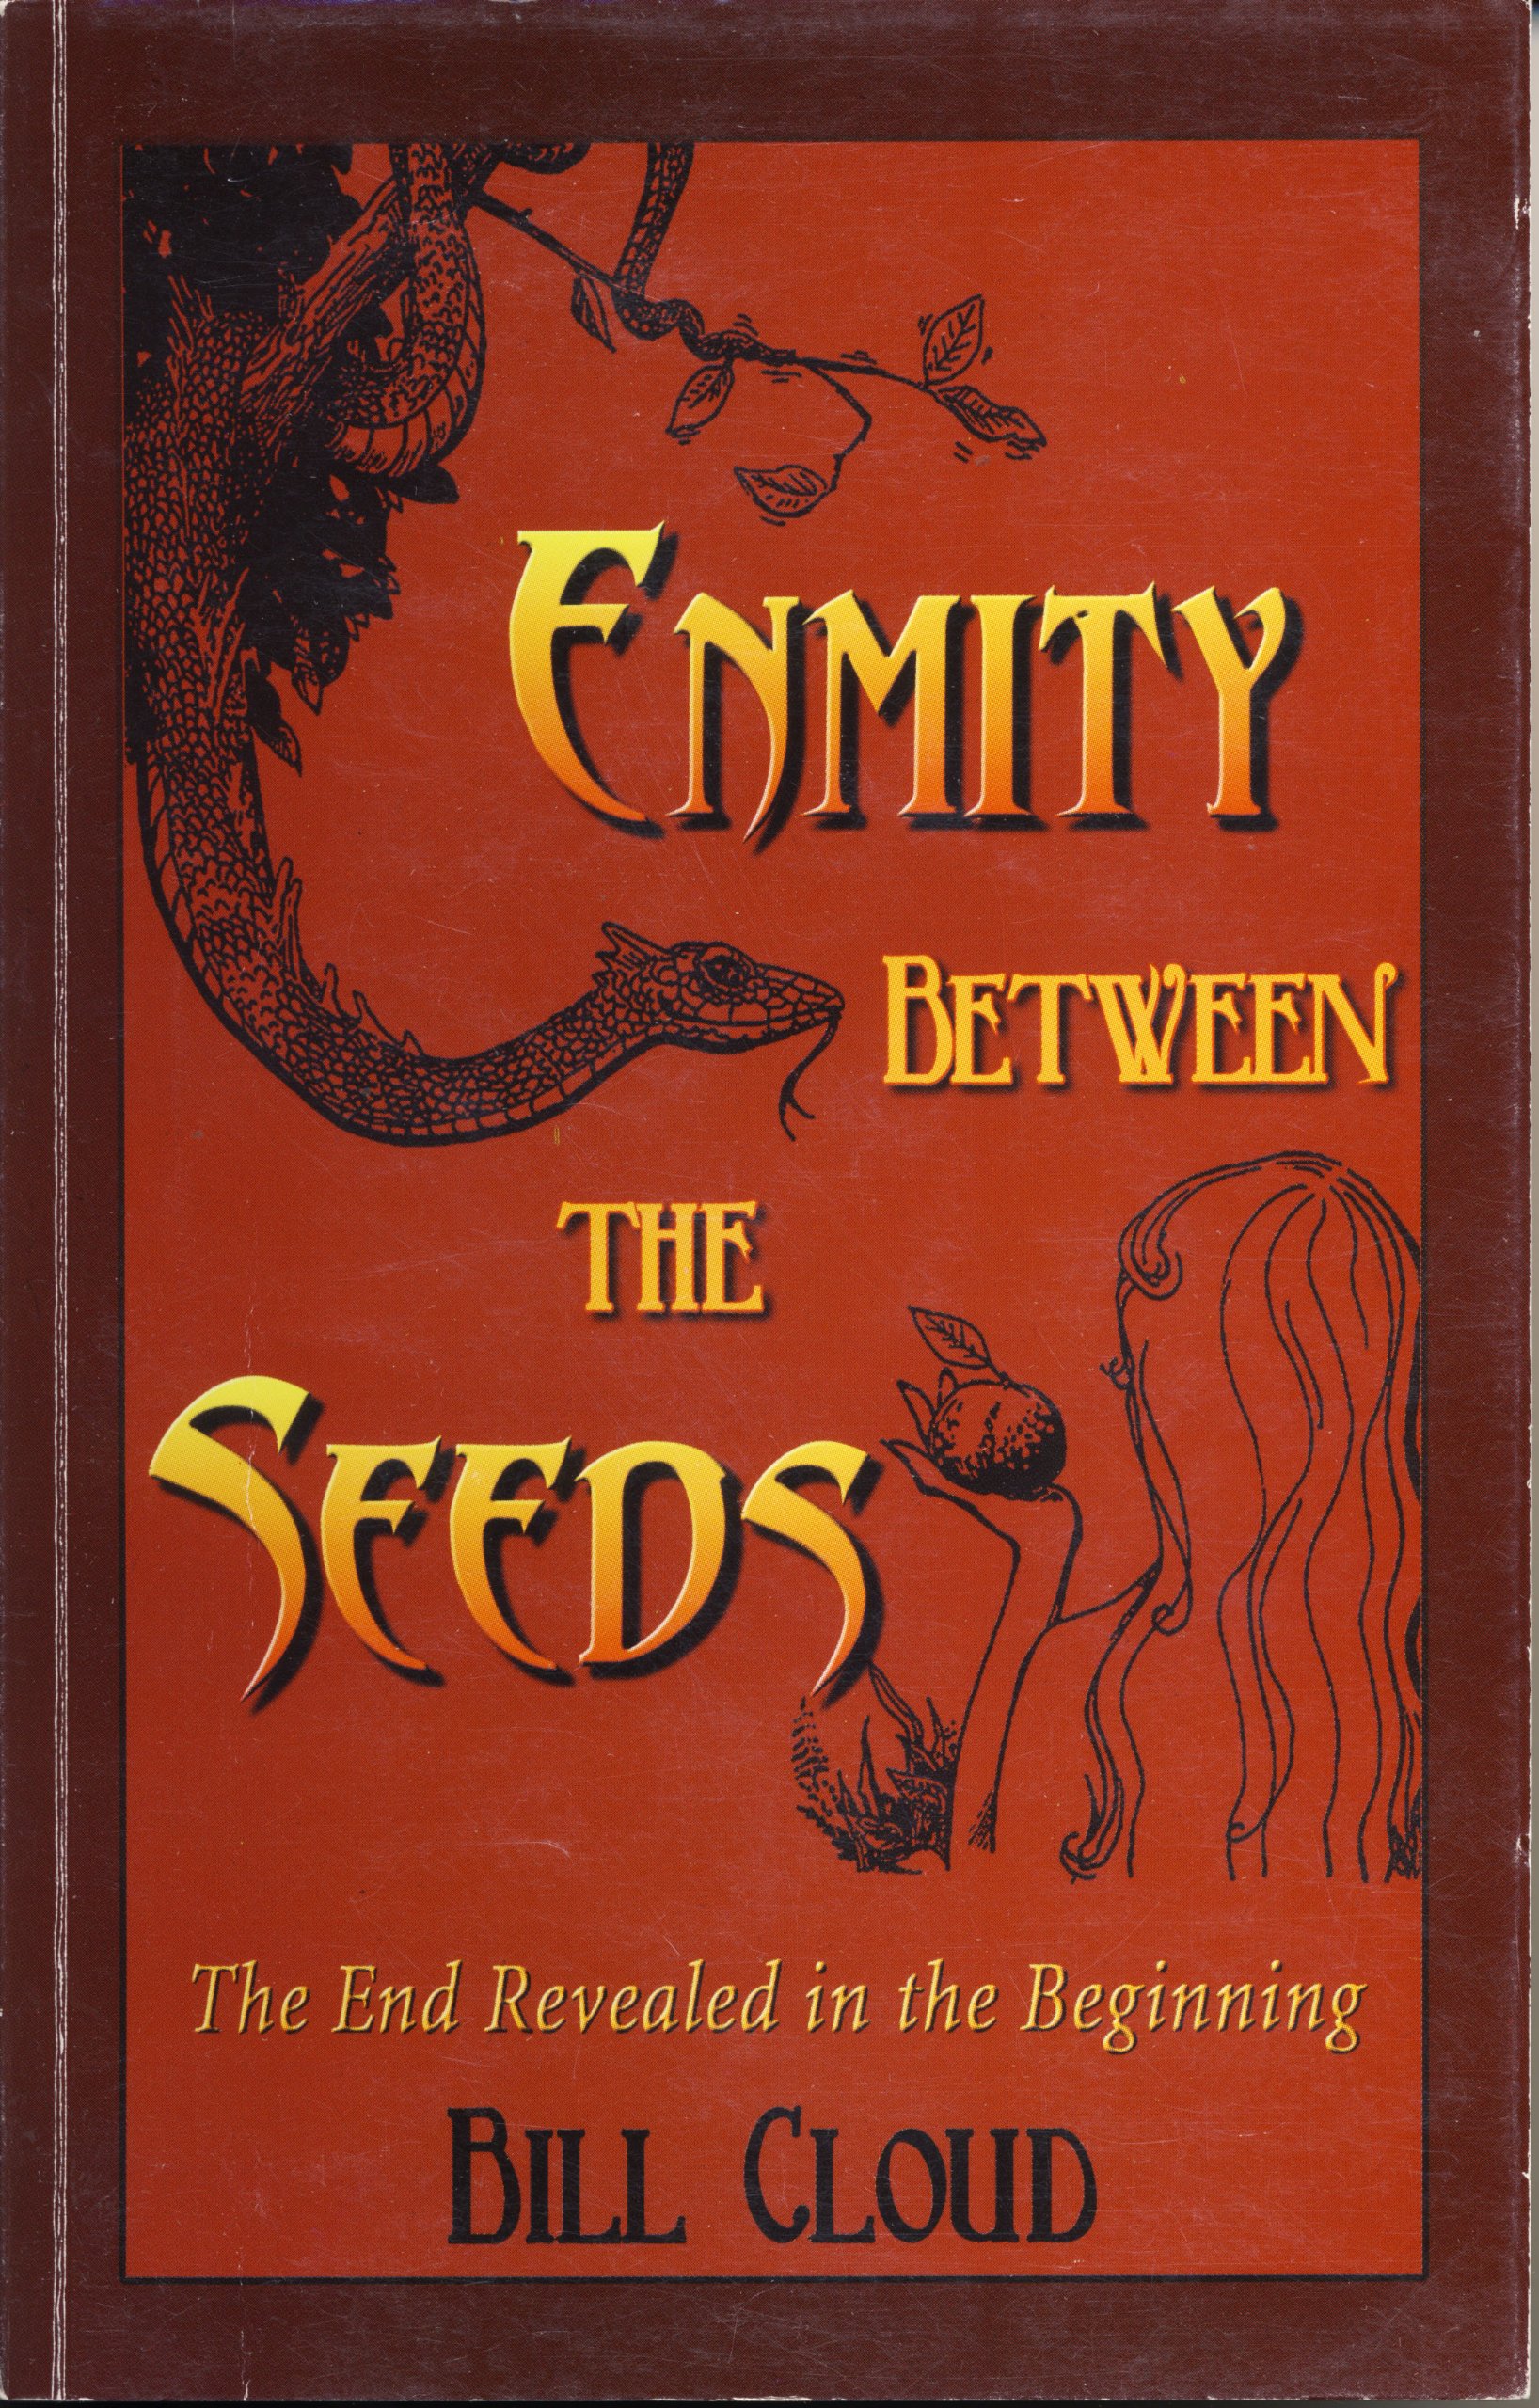 Book: Enmity Between the Seeds